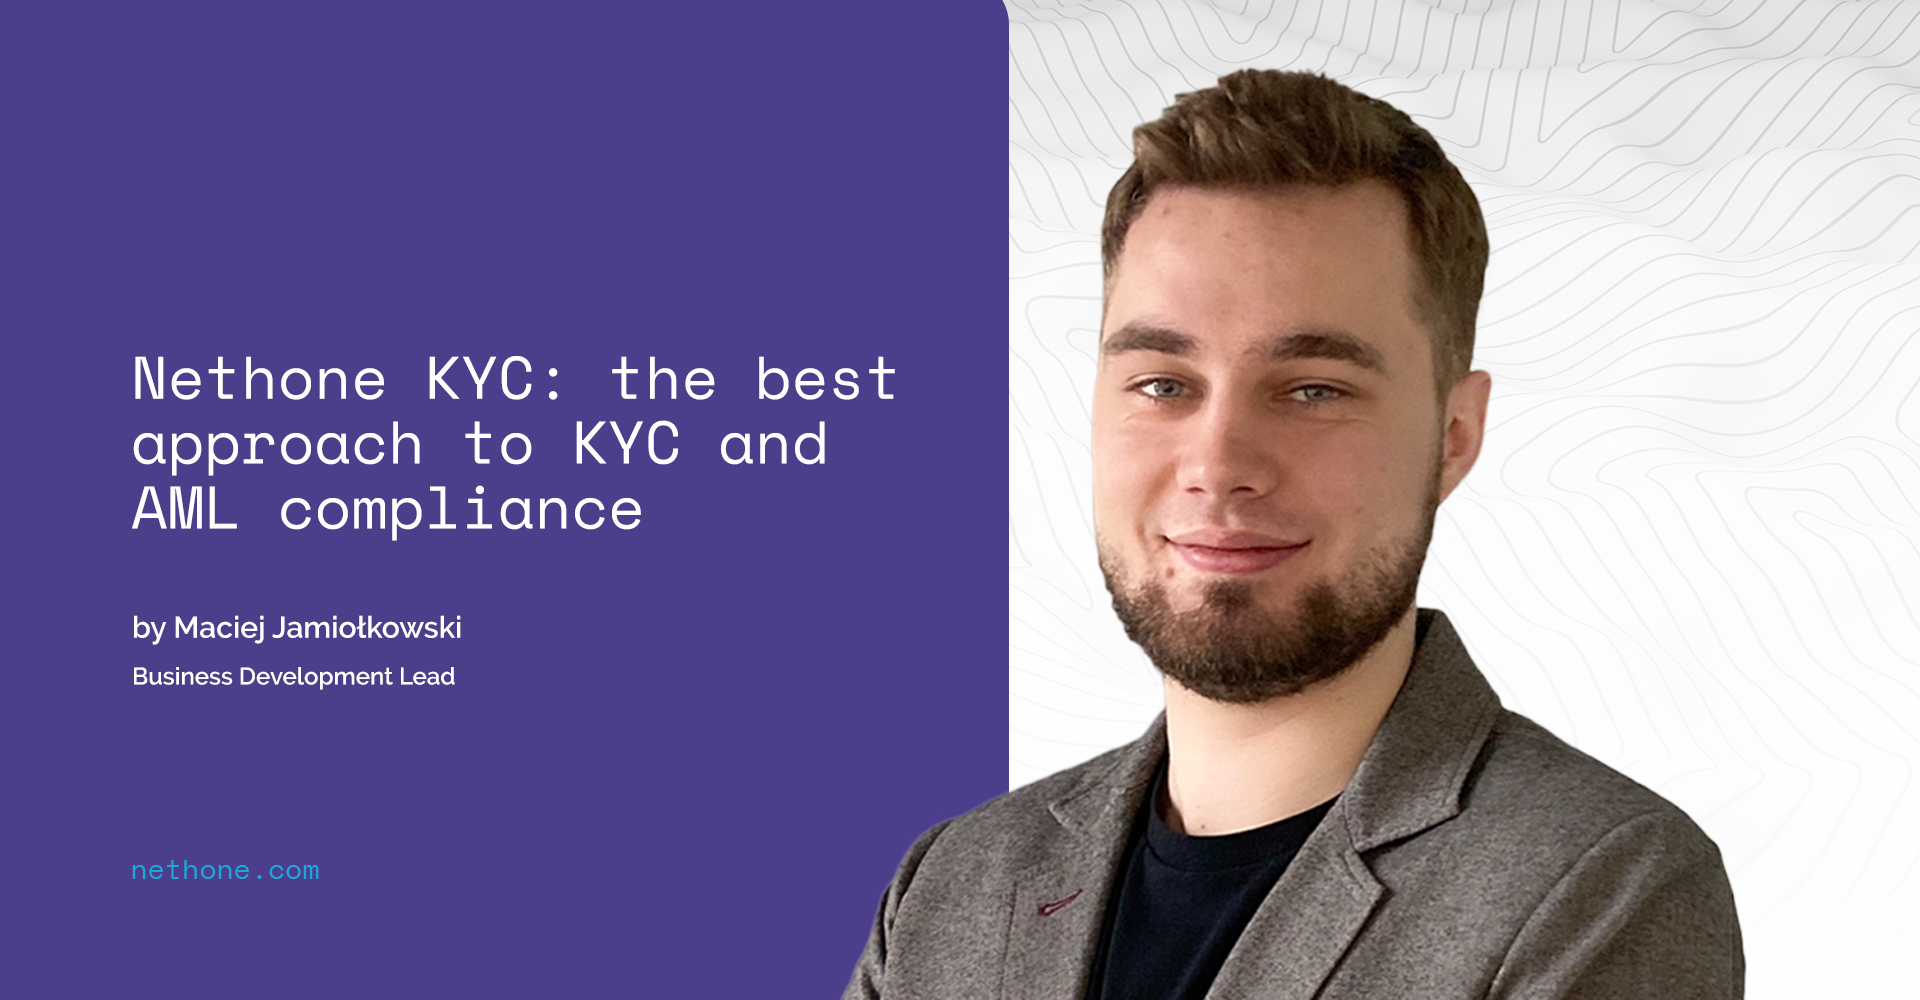 Nethone KYC: the best approach to KYC and AML compliance